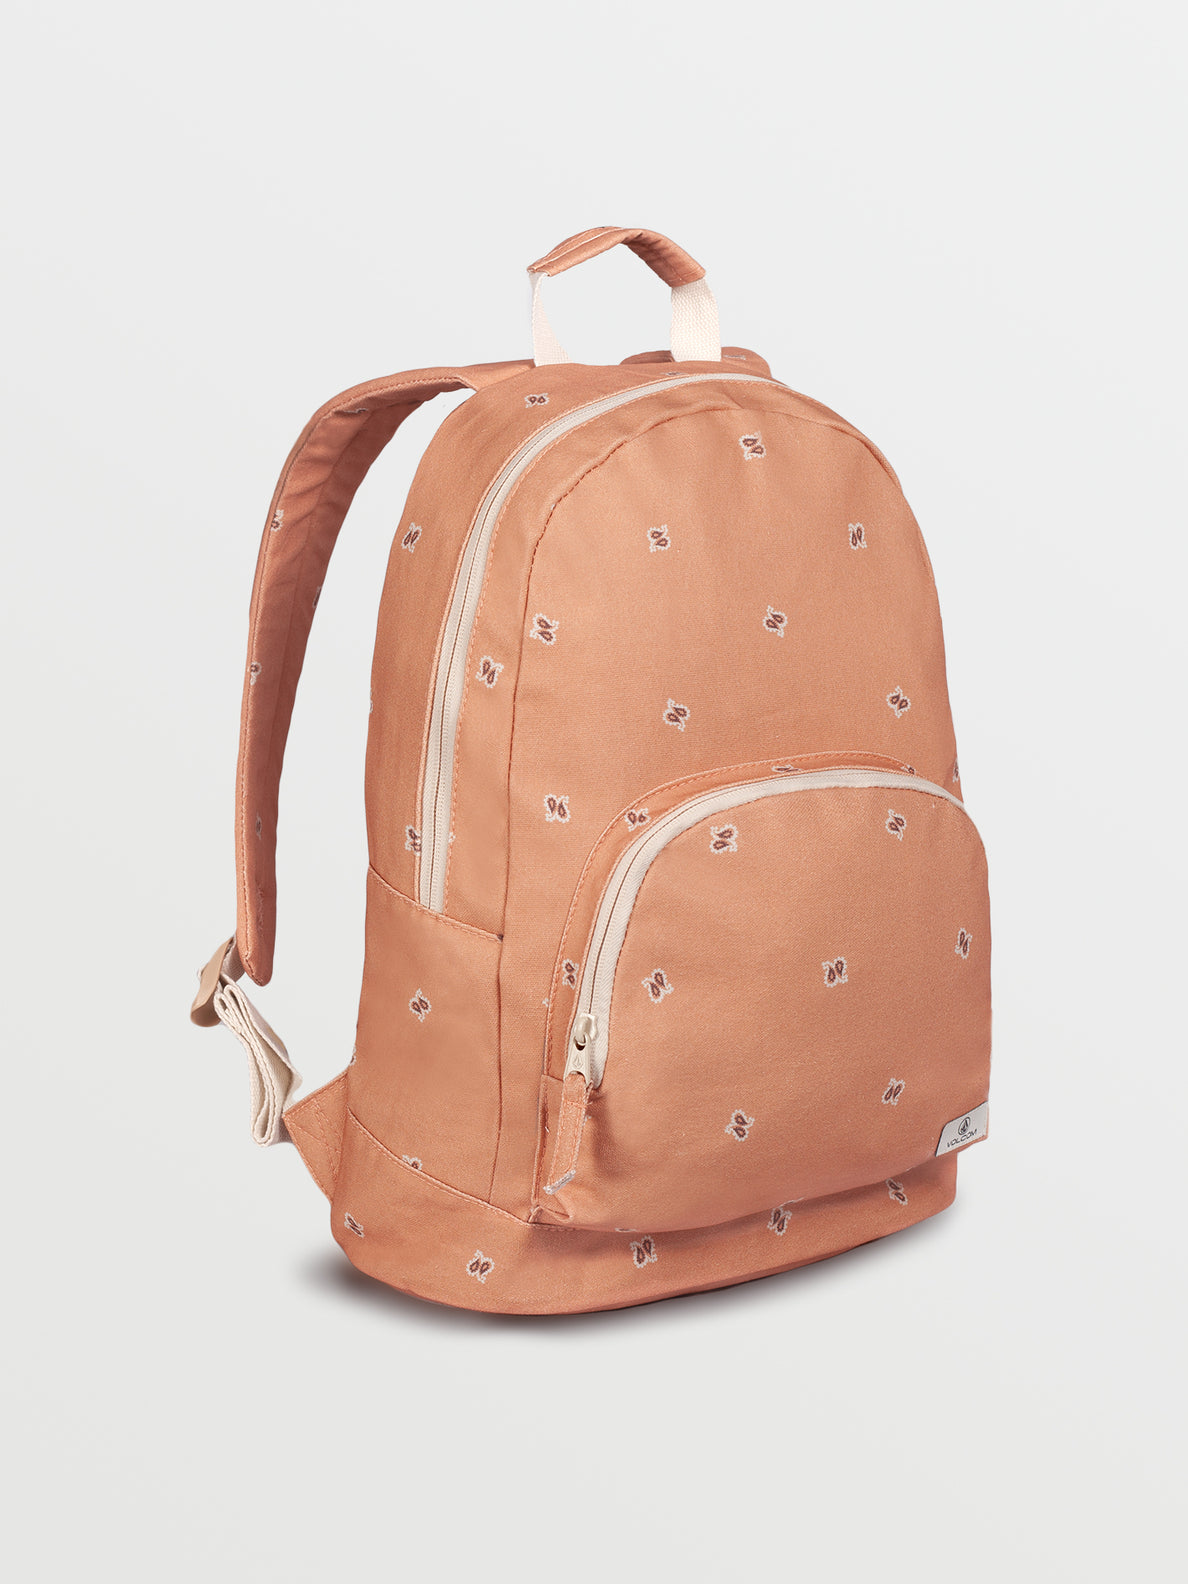 Vismiintrend Fashion Leather Backpack Purse For Women And Girls Crossbody  Shoulder Office College at Rs 1350 | Bag for School in Jaipur | ID:  27602301597